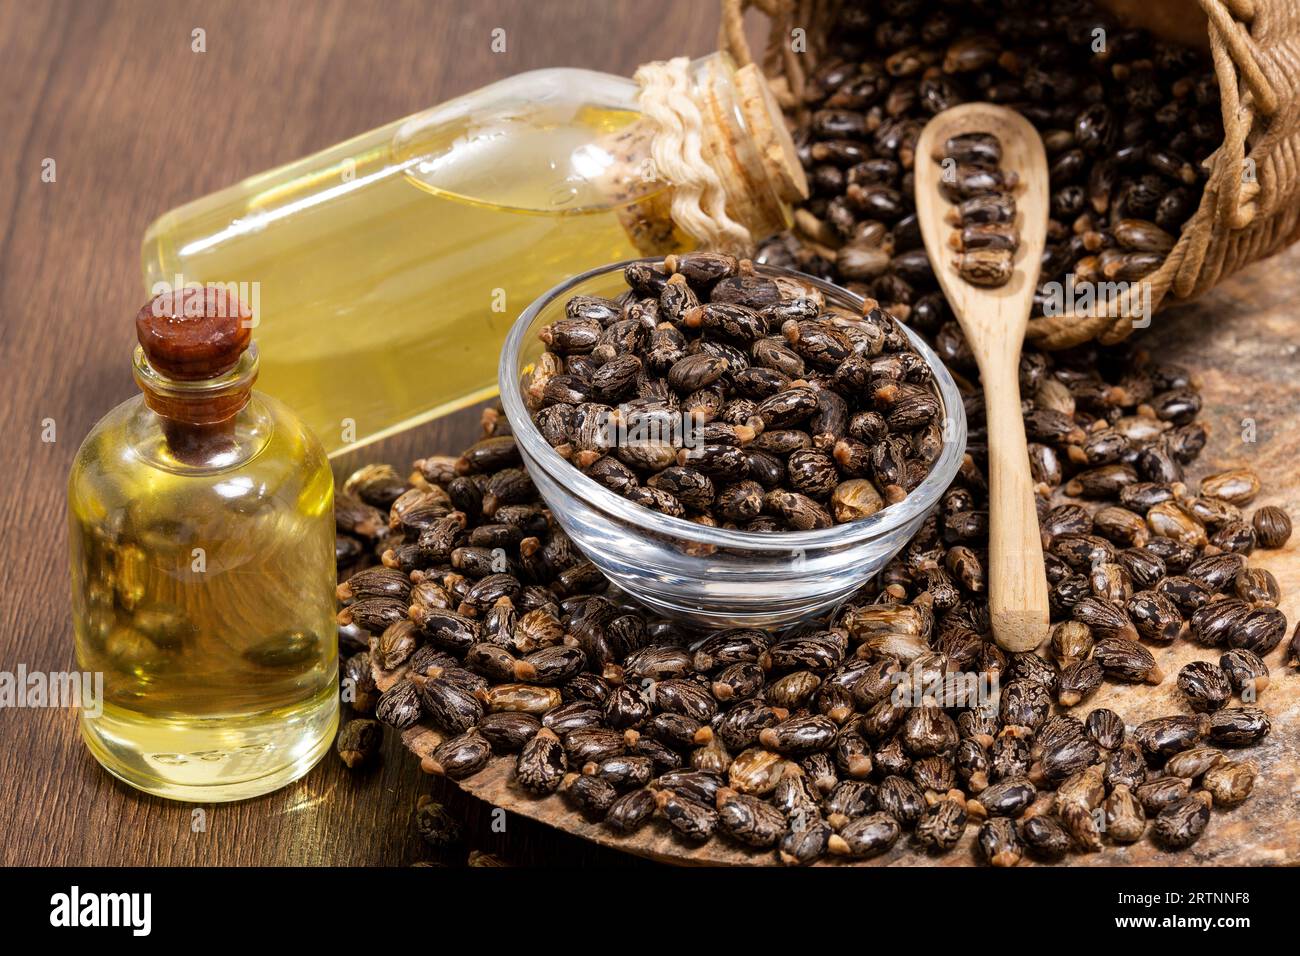 Ricinus communis - Dried seeds And Oil From The Fruit Of The Castor Bean Plant Stock Photo